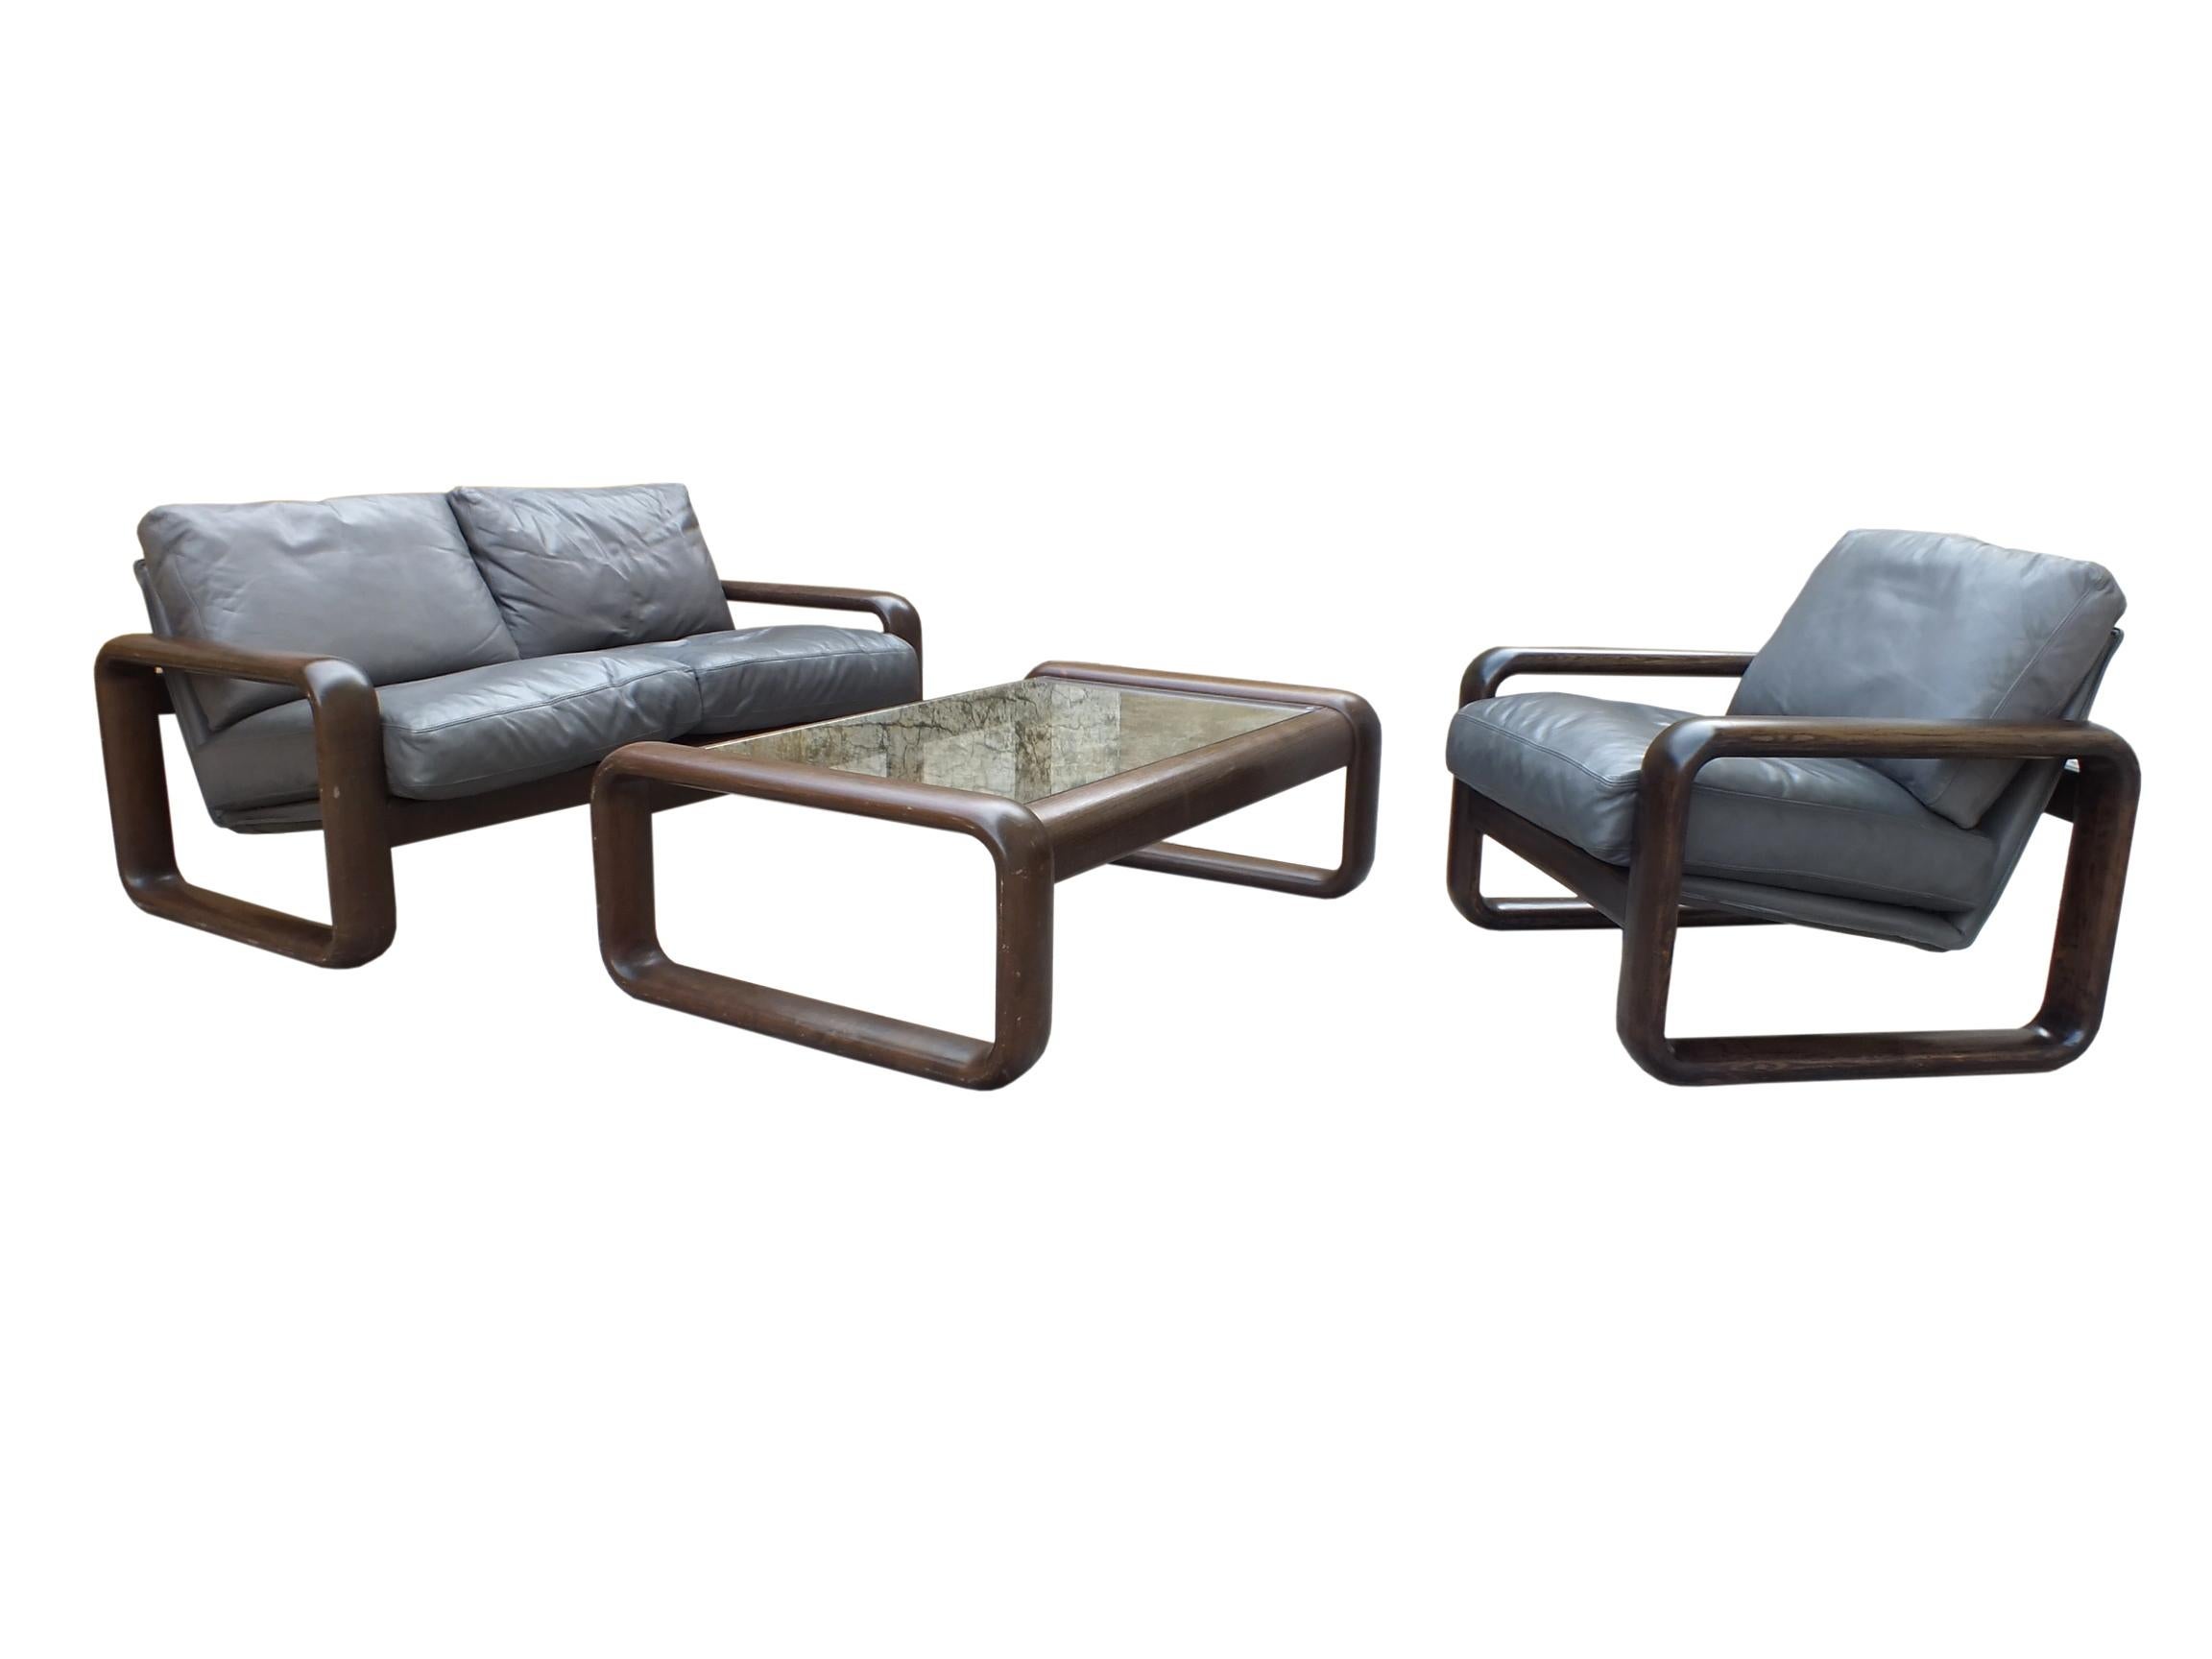 Hombre set in leather gray/azur and wood by Rosenthal design Burkhard Vogtherr in year ’74, set of three pieces of sofas two seat more armchair more low table.

 set of three piece in good vintage condition with light sign of use

measure;